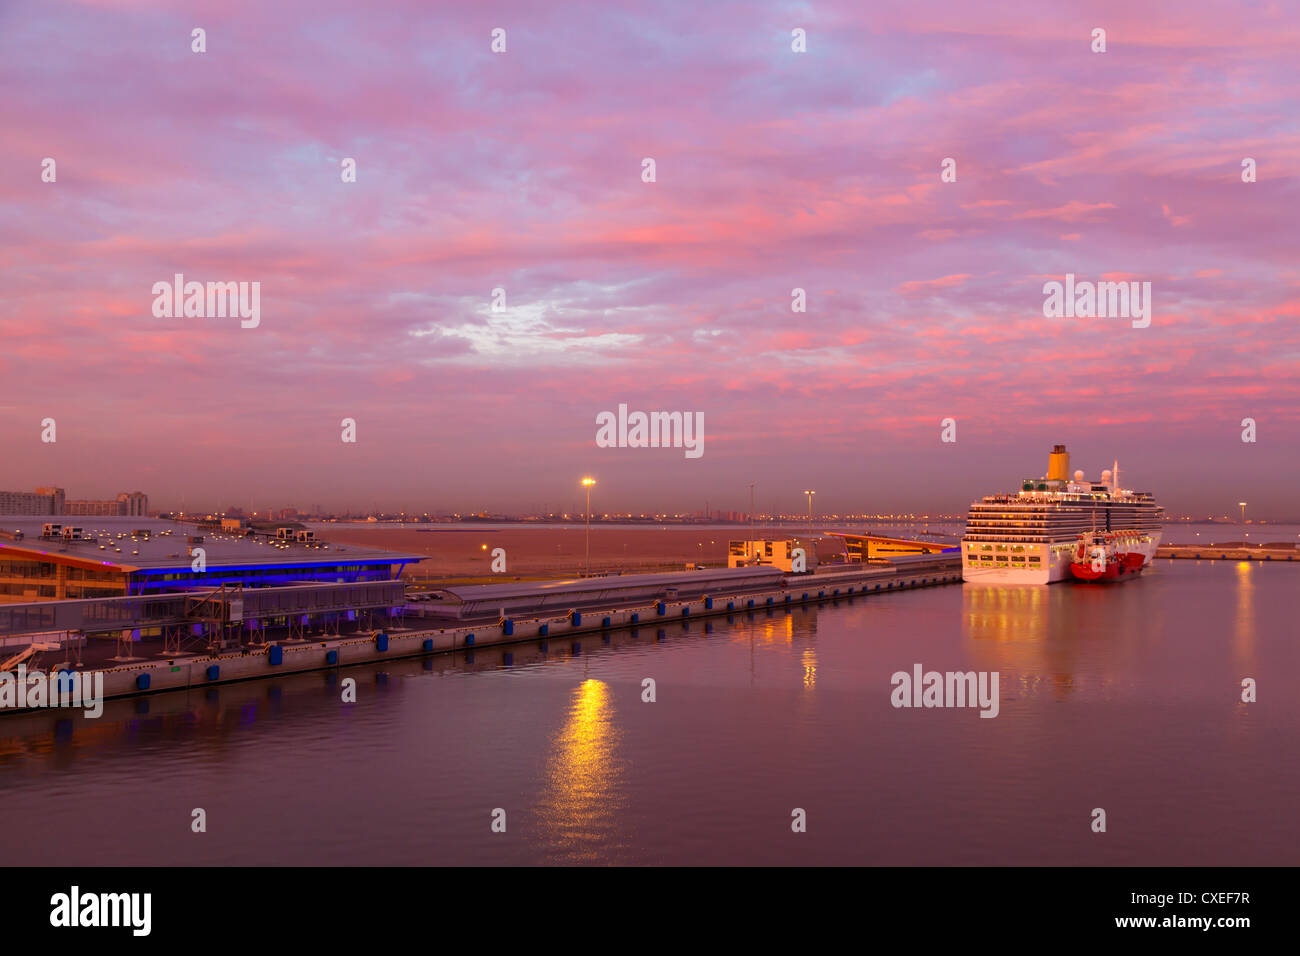 St Petersburg Russia, the cruise ship Arcadia in dock at dawn Stock Photo